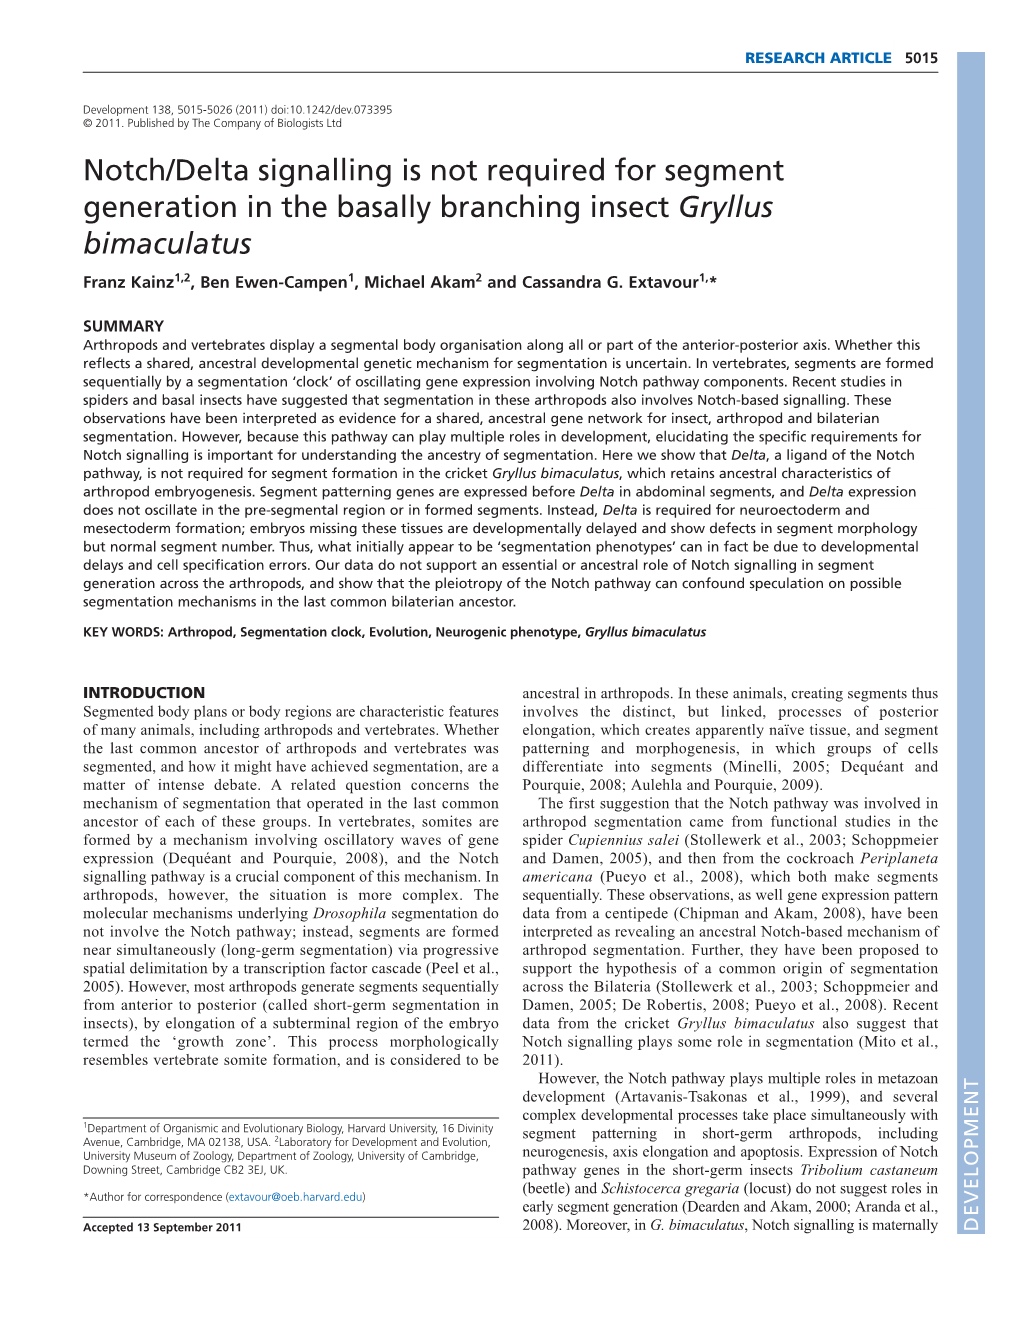 Notch/Delta Signalling Is Not Required for Segment Generation in the Basally Branching Insect Gryllus Bimaculatus